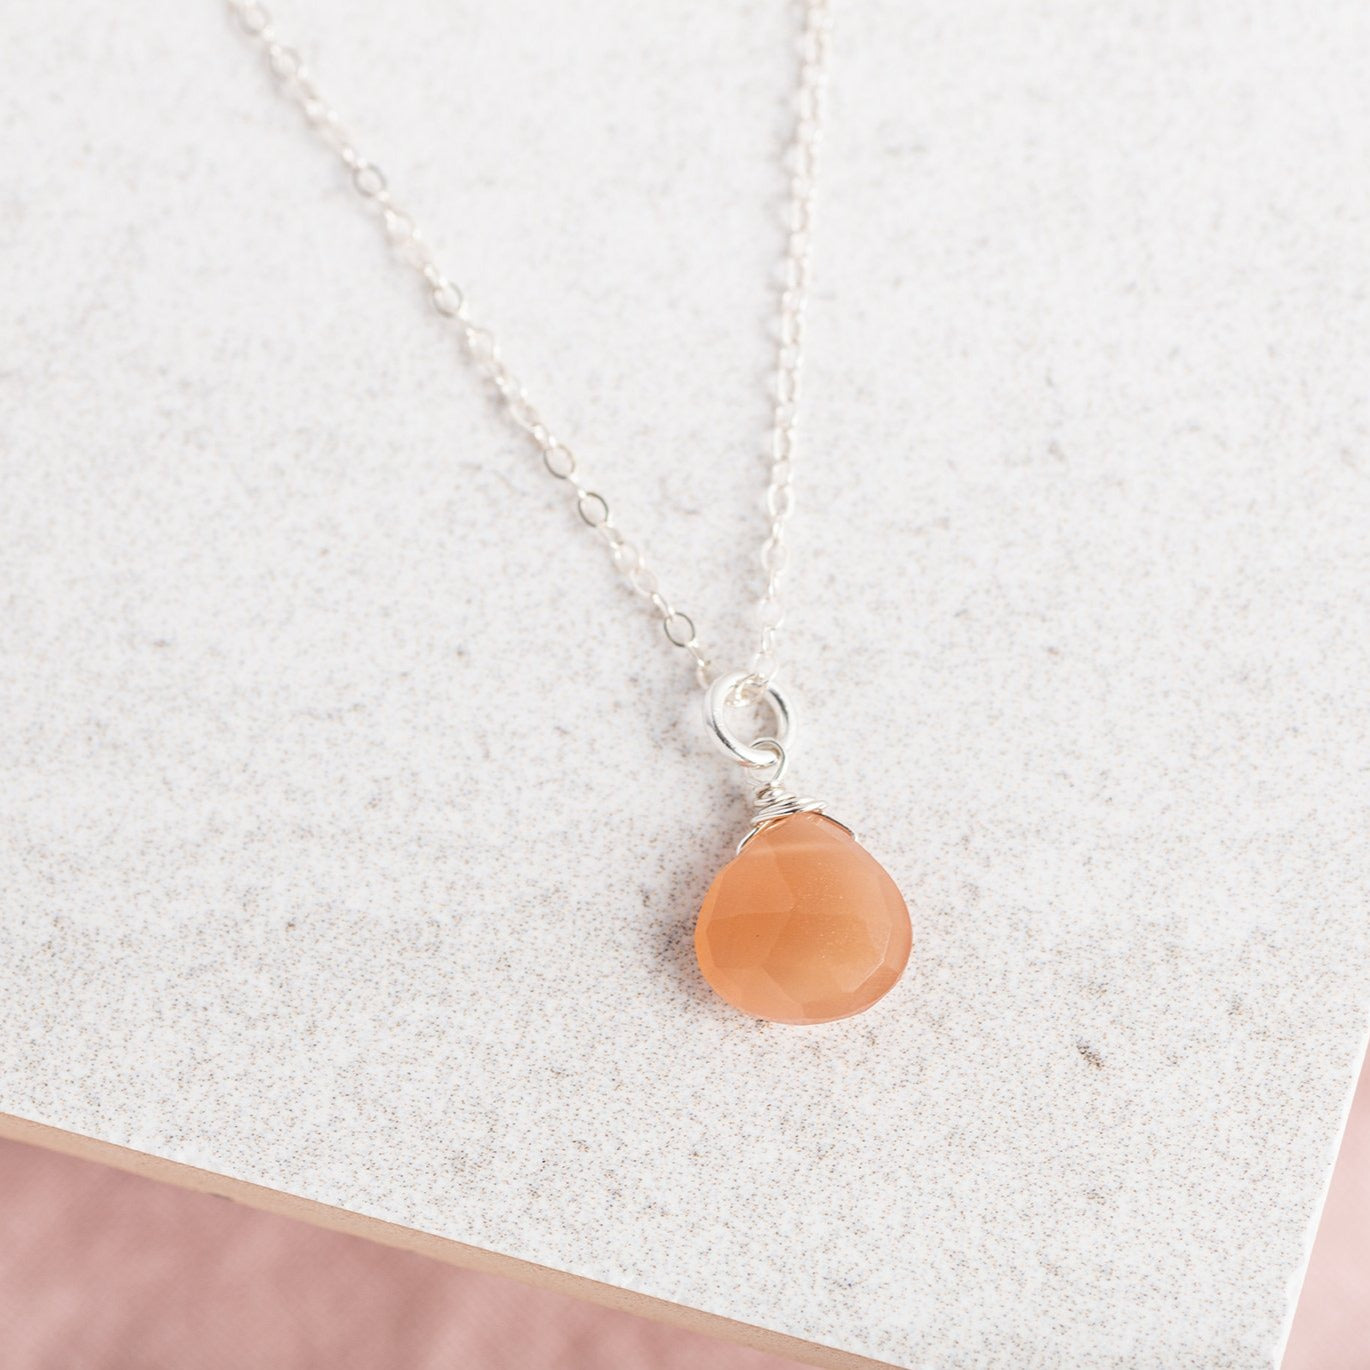 Silver Moonstone Necklace Peach Gemstone Necklace June Birthstone Wire  Wrapped Necklace Peach Moonstone Pendant Necklace - Etsy